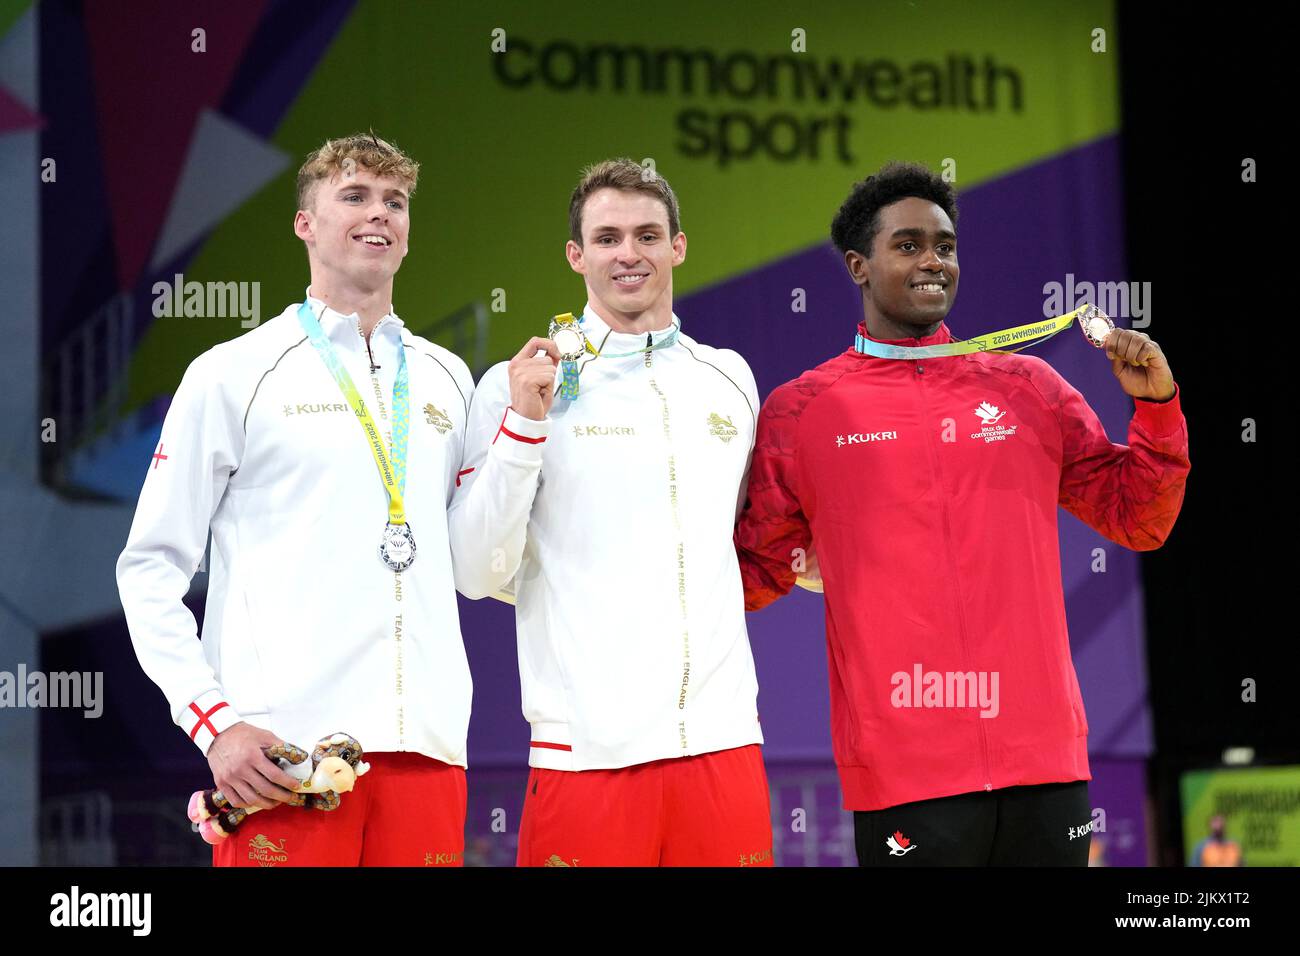 England's Benjamin Proud (centre) with the gold medal, England's Lewis Edward Burras (left) with the silver medal and Canada's Joshua Liendo Edwards with the bronze medal after the Men's 50m Freestyle Final at the Sandwell Aquatics Centre on day six of the 2022 Commonwealth Games in Birmingham. Picture date: Wednesday August 3, 2022. Stock Photo